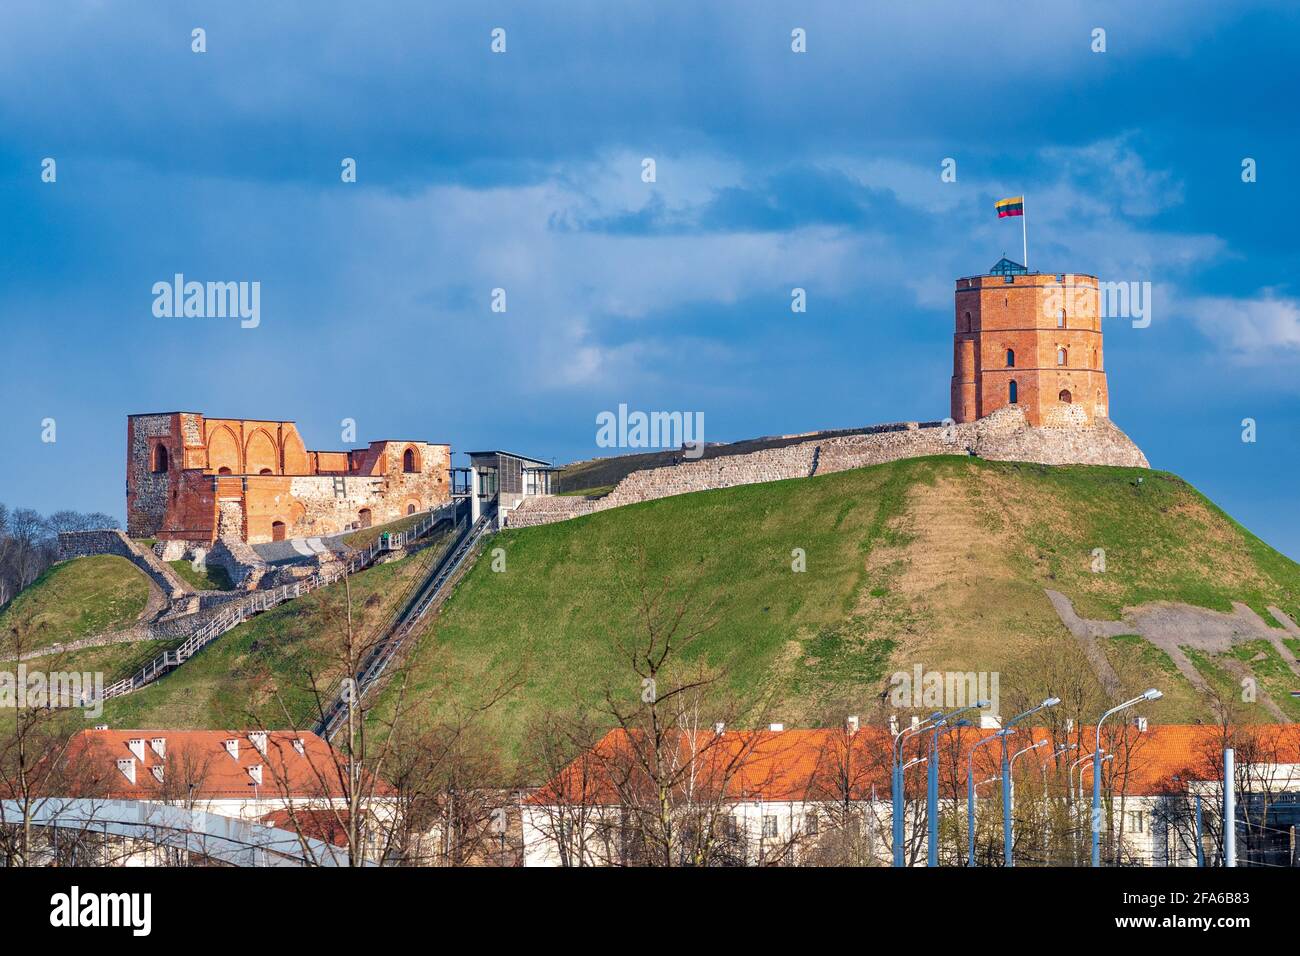 Gediminas Tower or Castle, the remaining part of the Upper Medieval Castle in Vilnius, Lithuania with Lithuanian flag Stock Photo